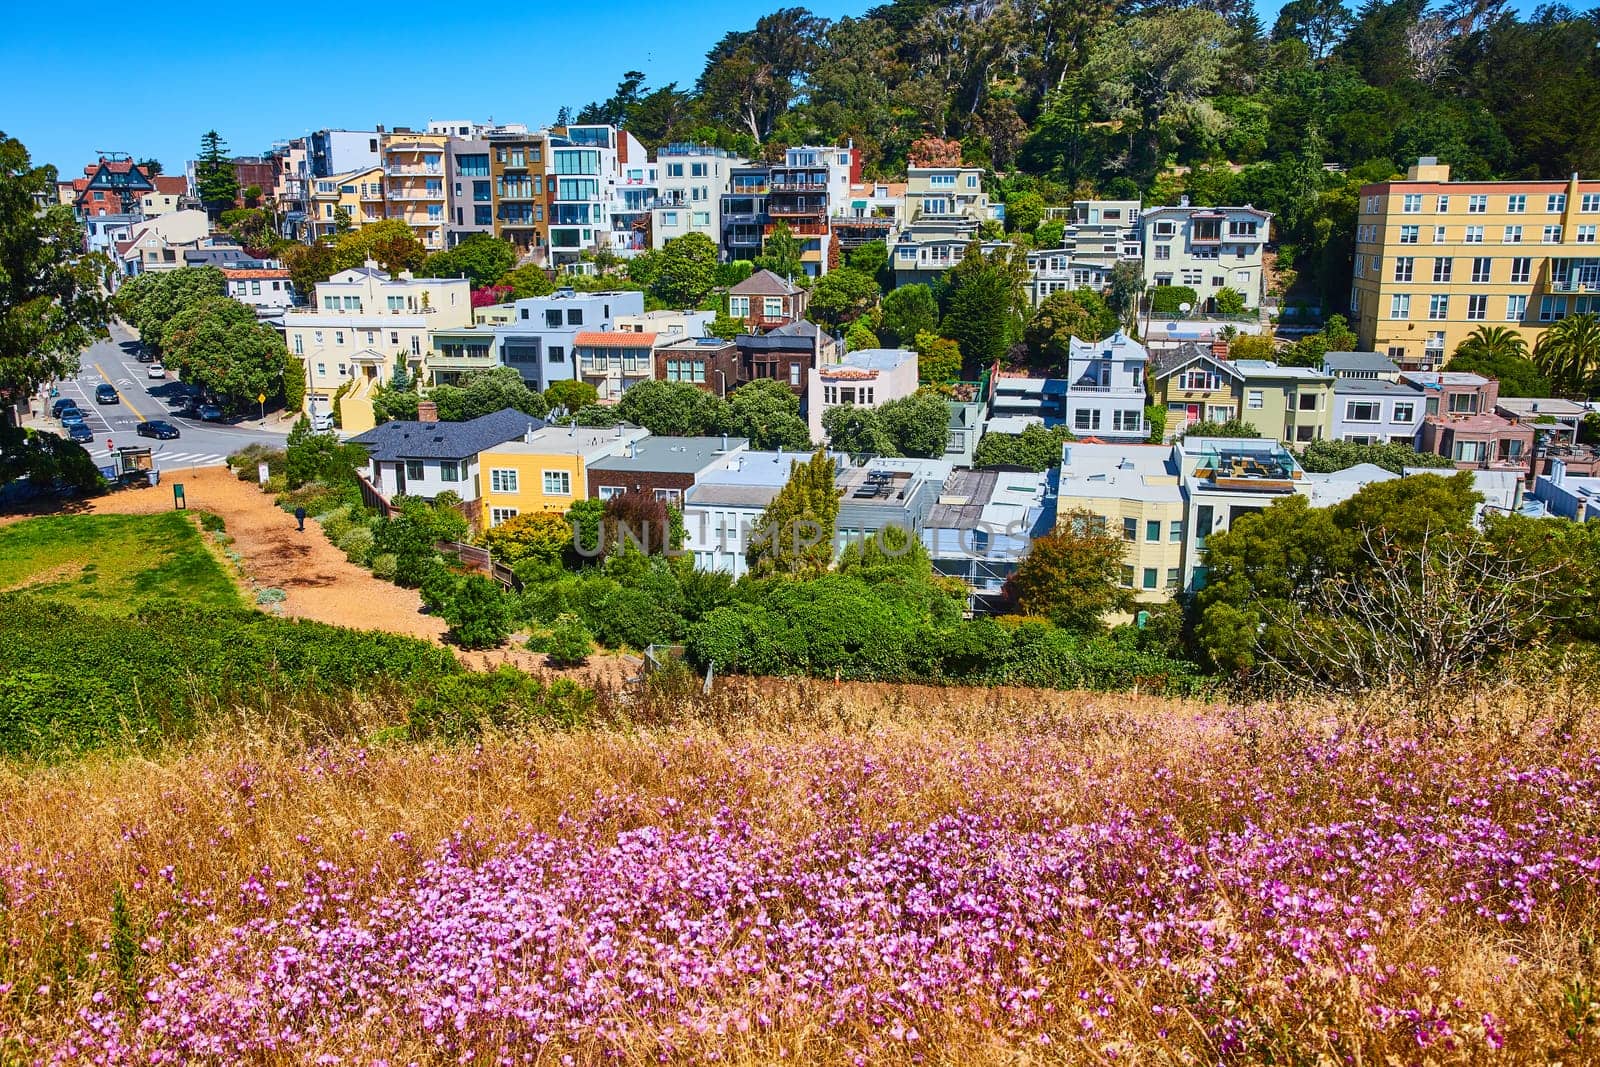 Image of Pink wildflowers on hill overlooking tall apartment buildings under blue sky